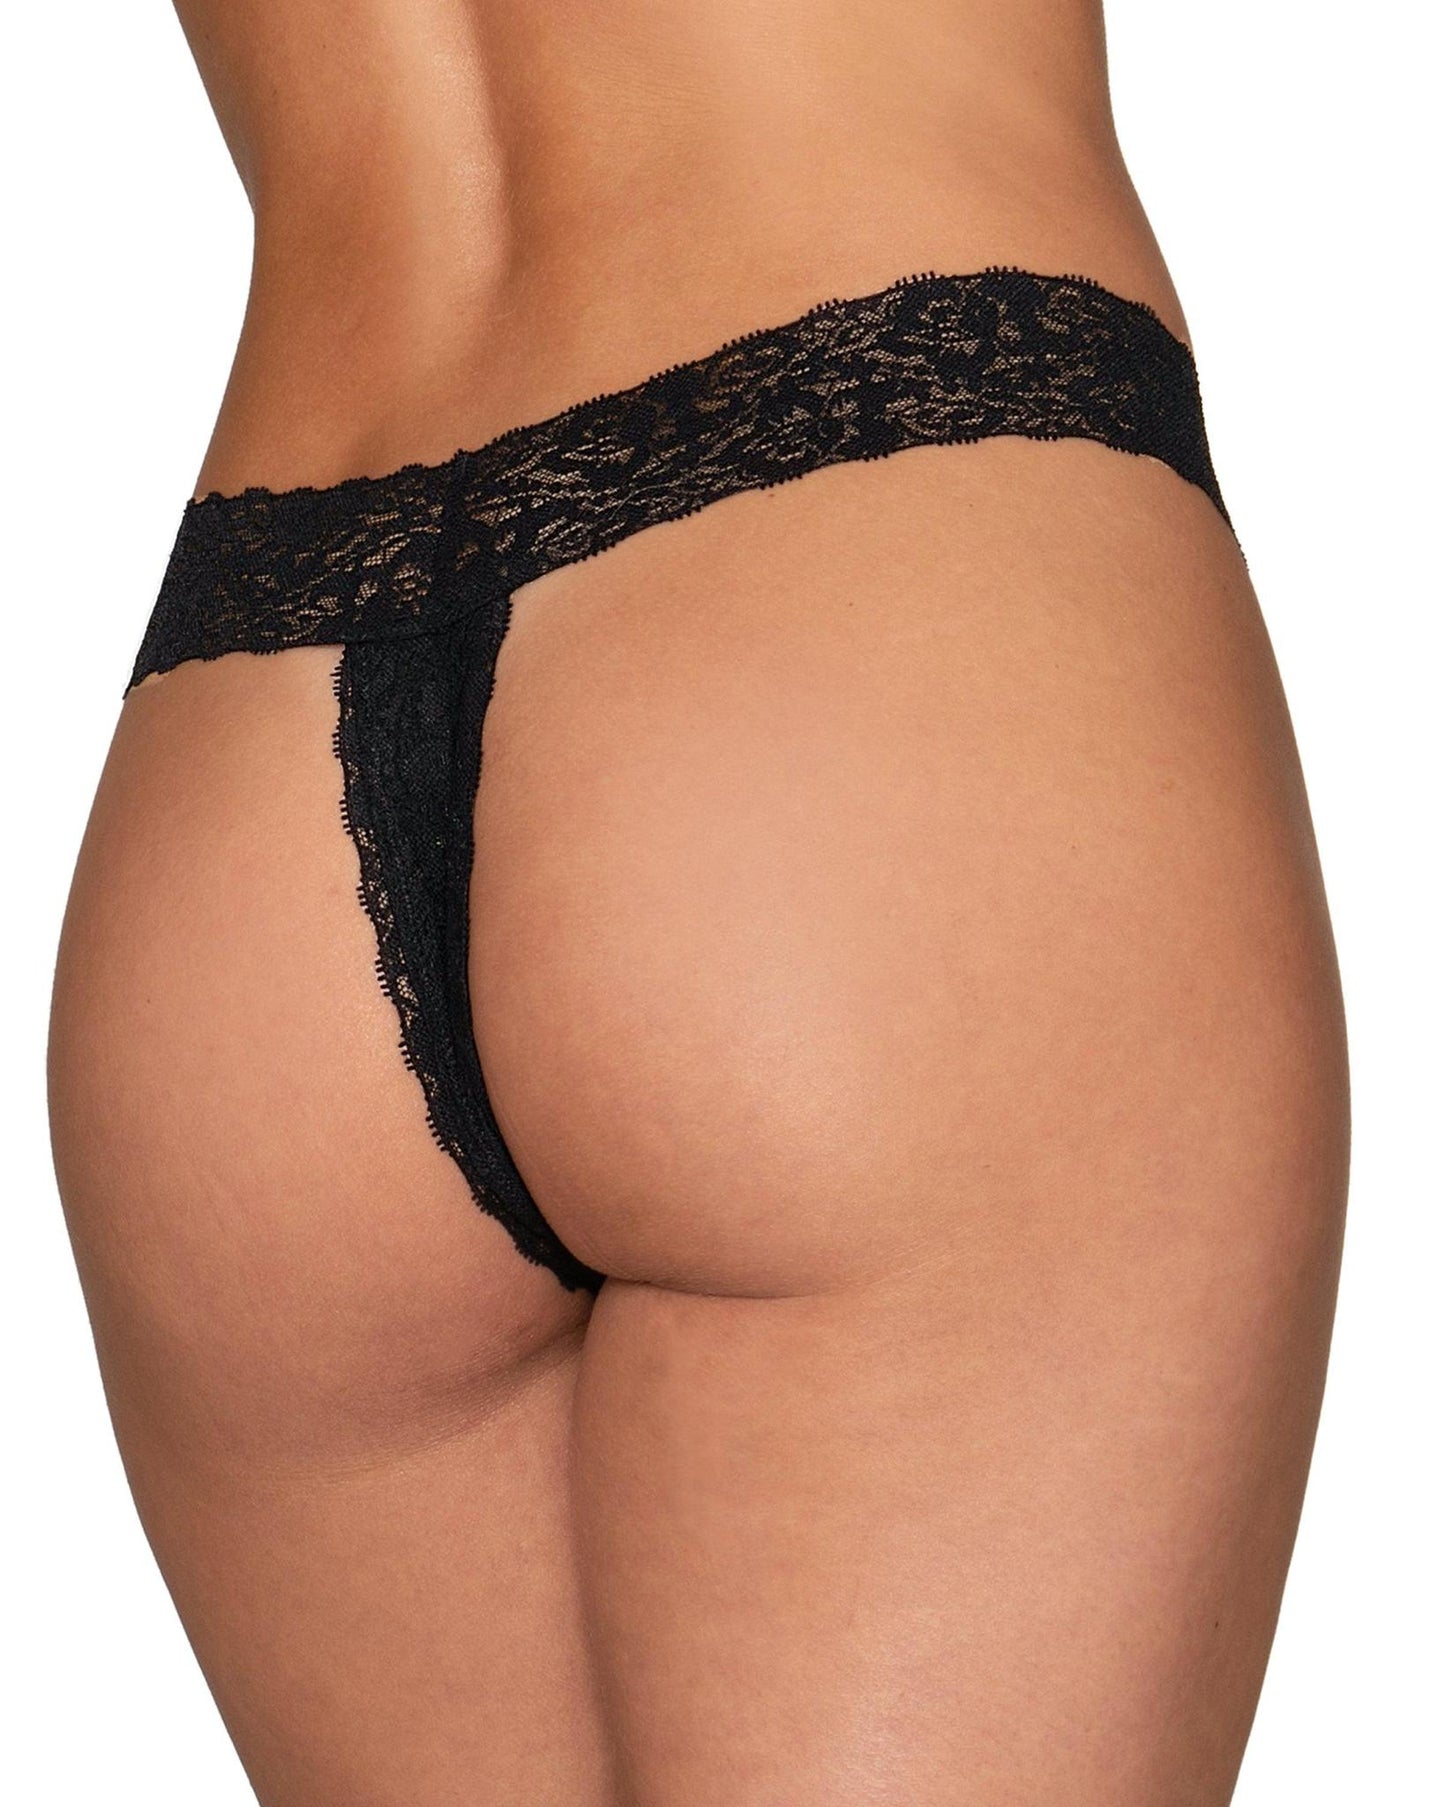 Stretch Lace Open Crotch Thong